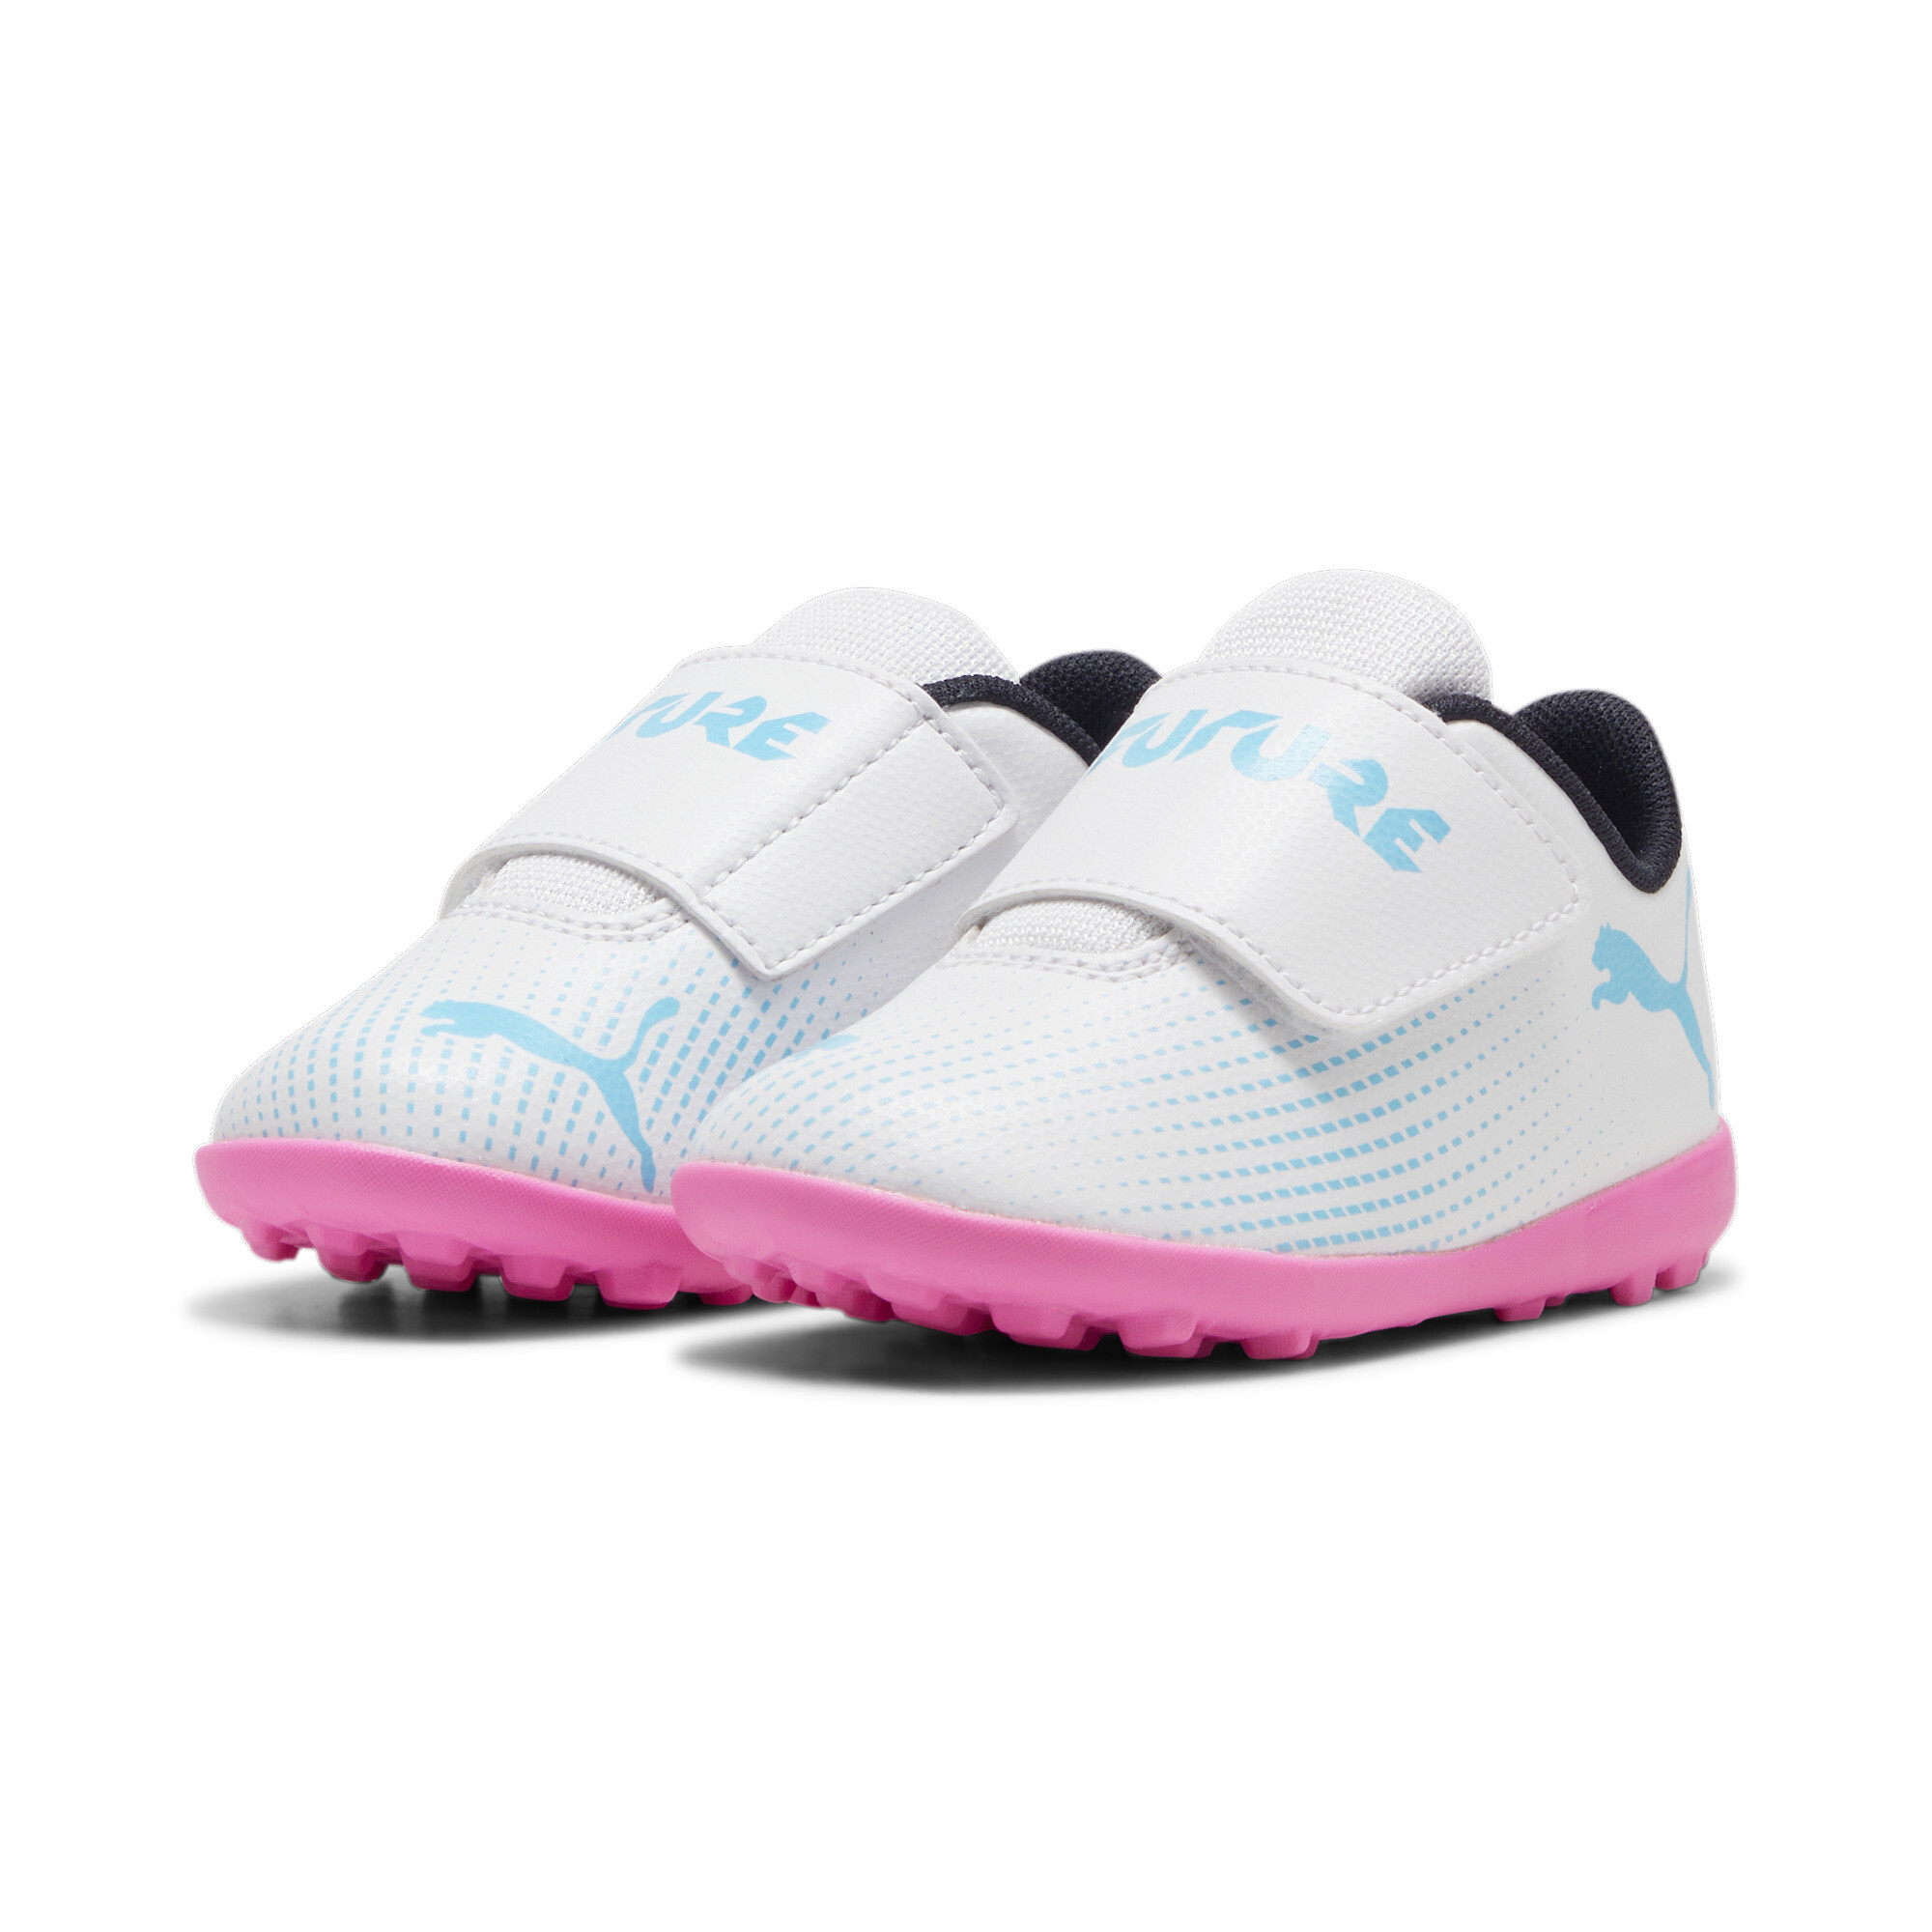 Kids' PUMA FUTURE 7 PLAY TT Toddlers' Football Boots In White/Pink, Size EU 22